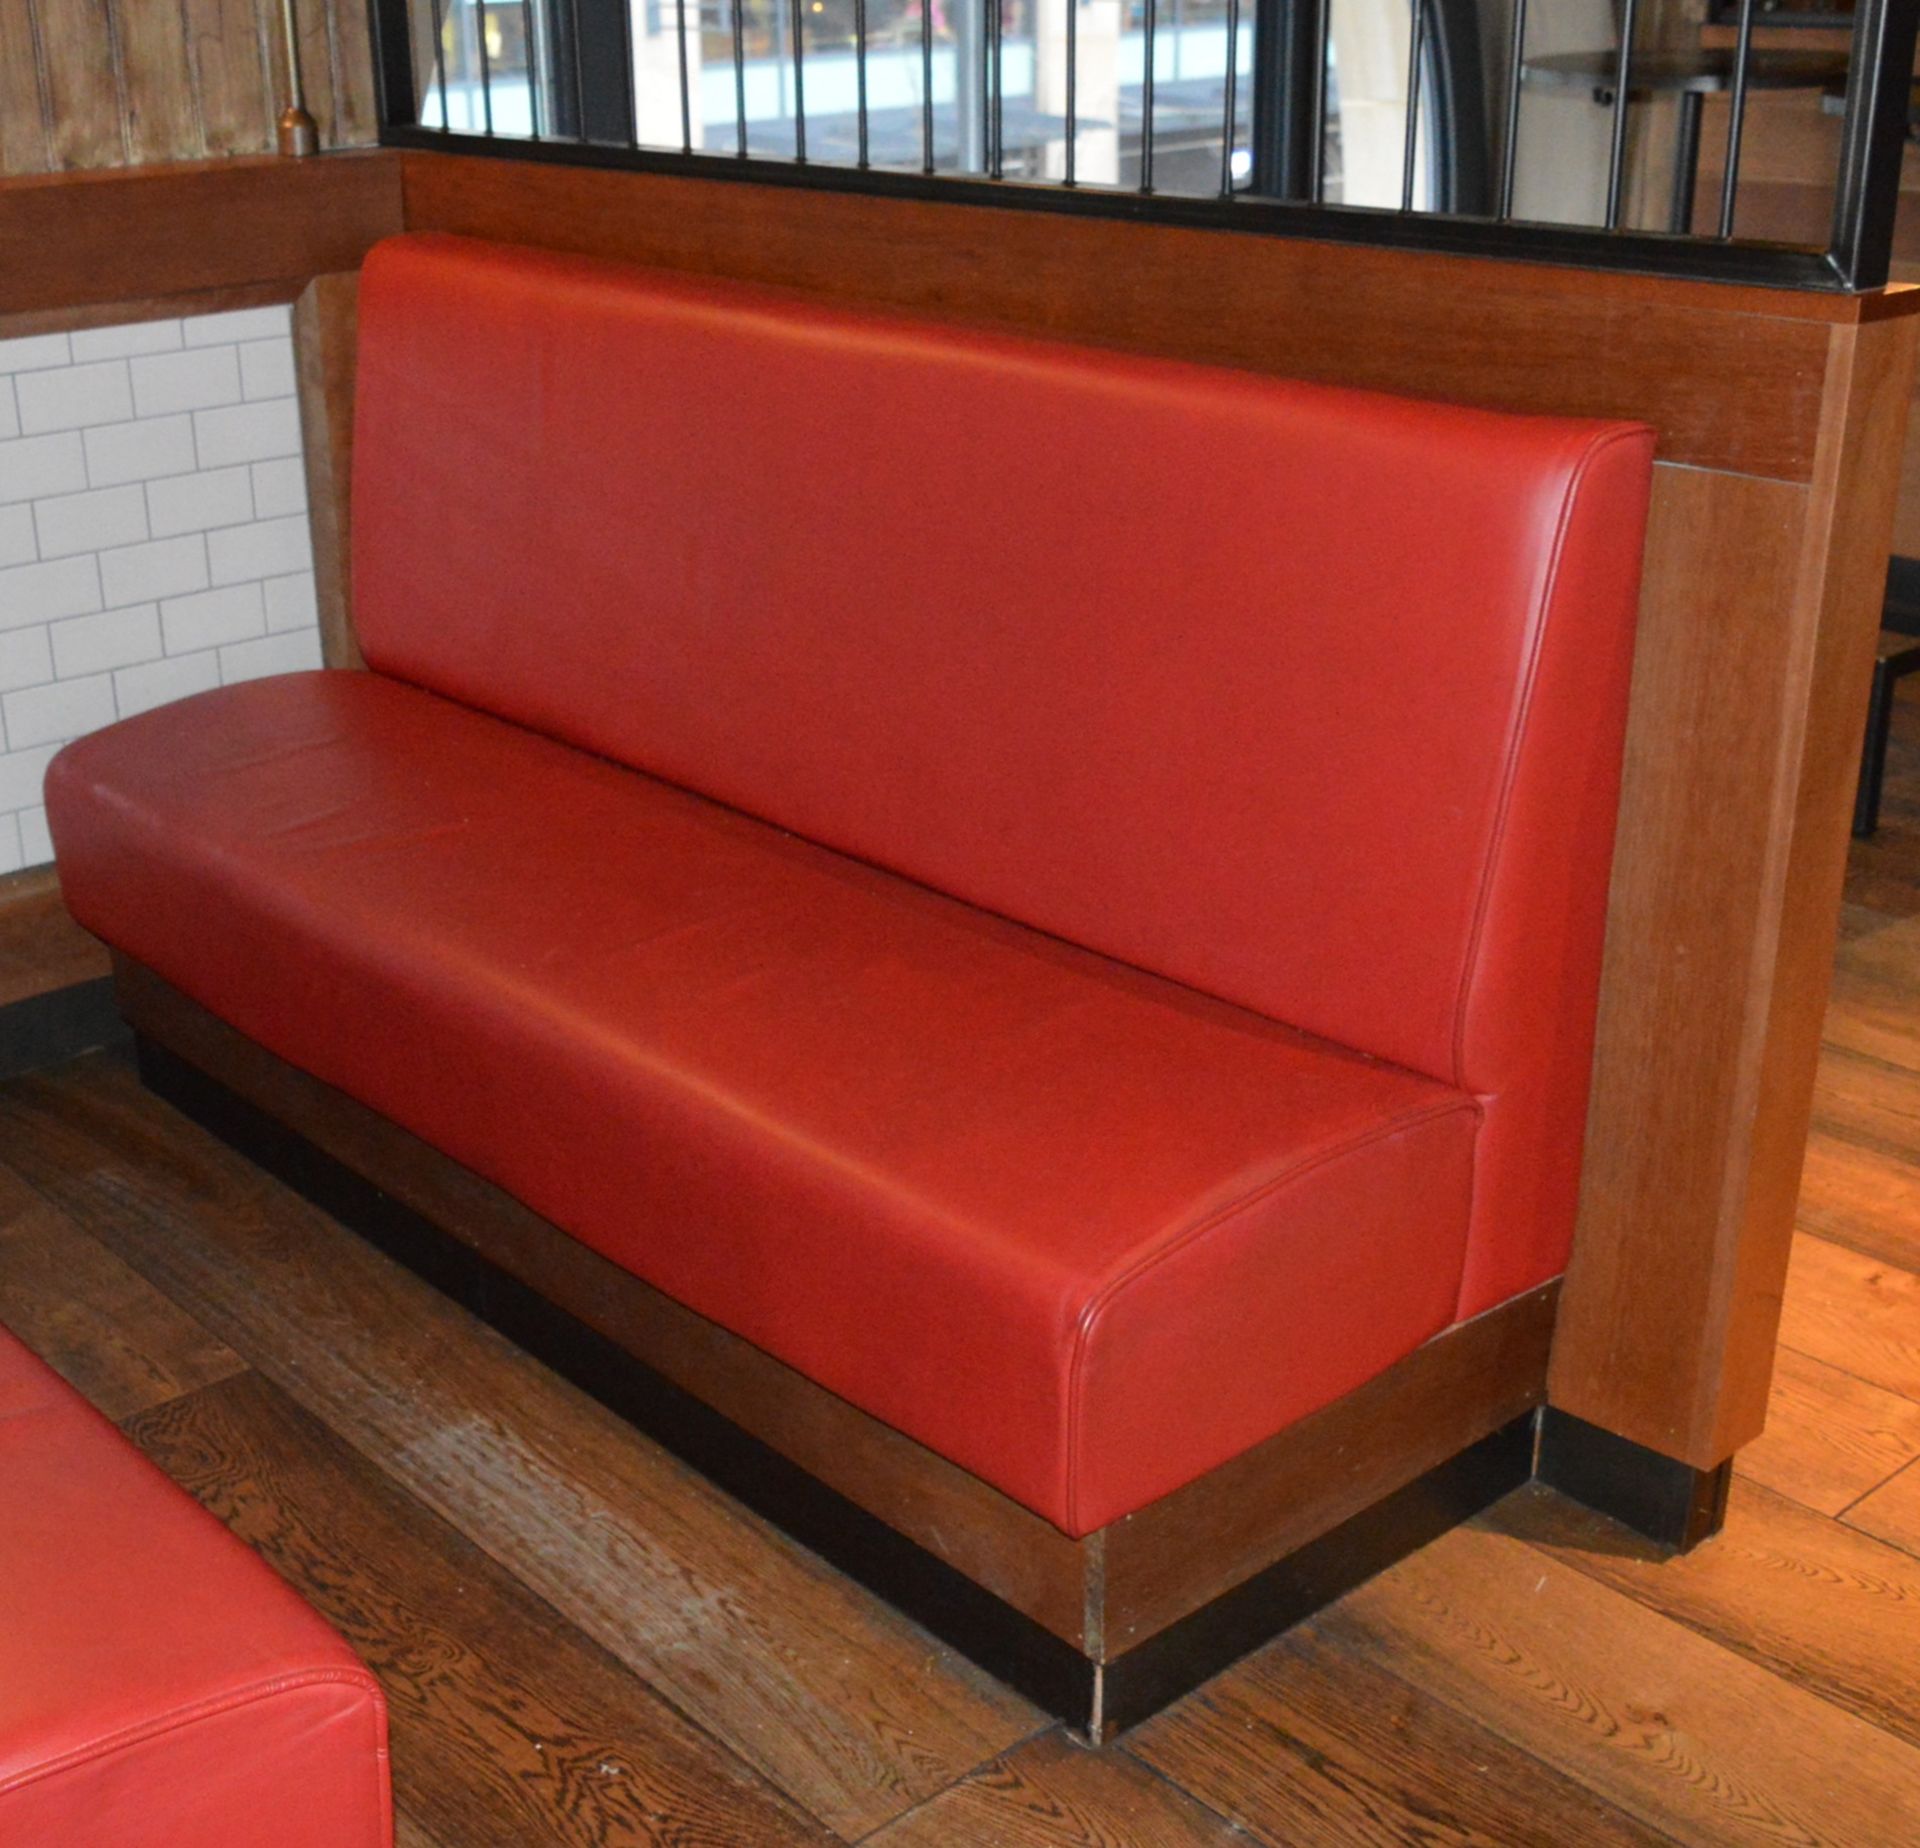 1 x Contemporary Seating Booth Upholstered in Red Leather - Image 3 of 11